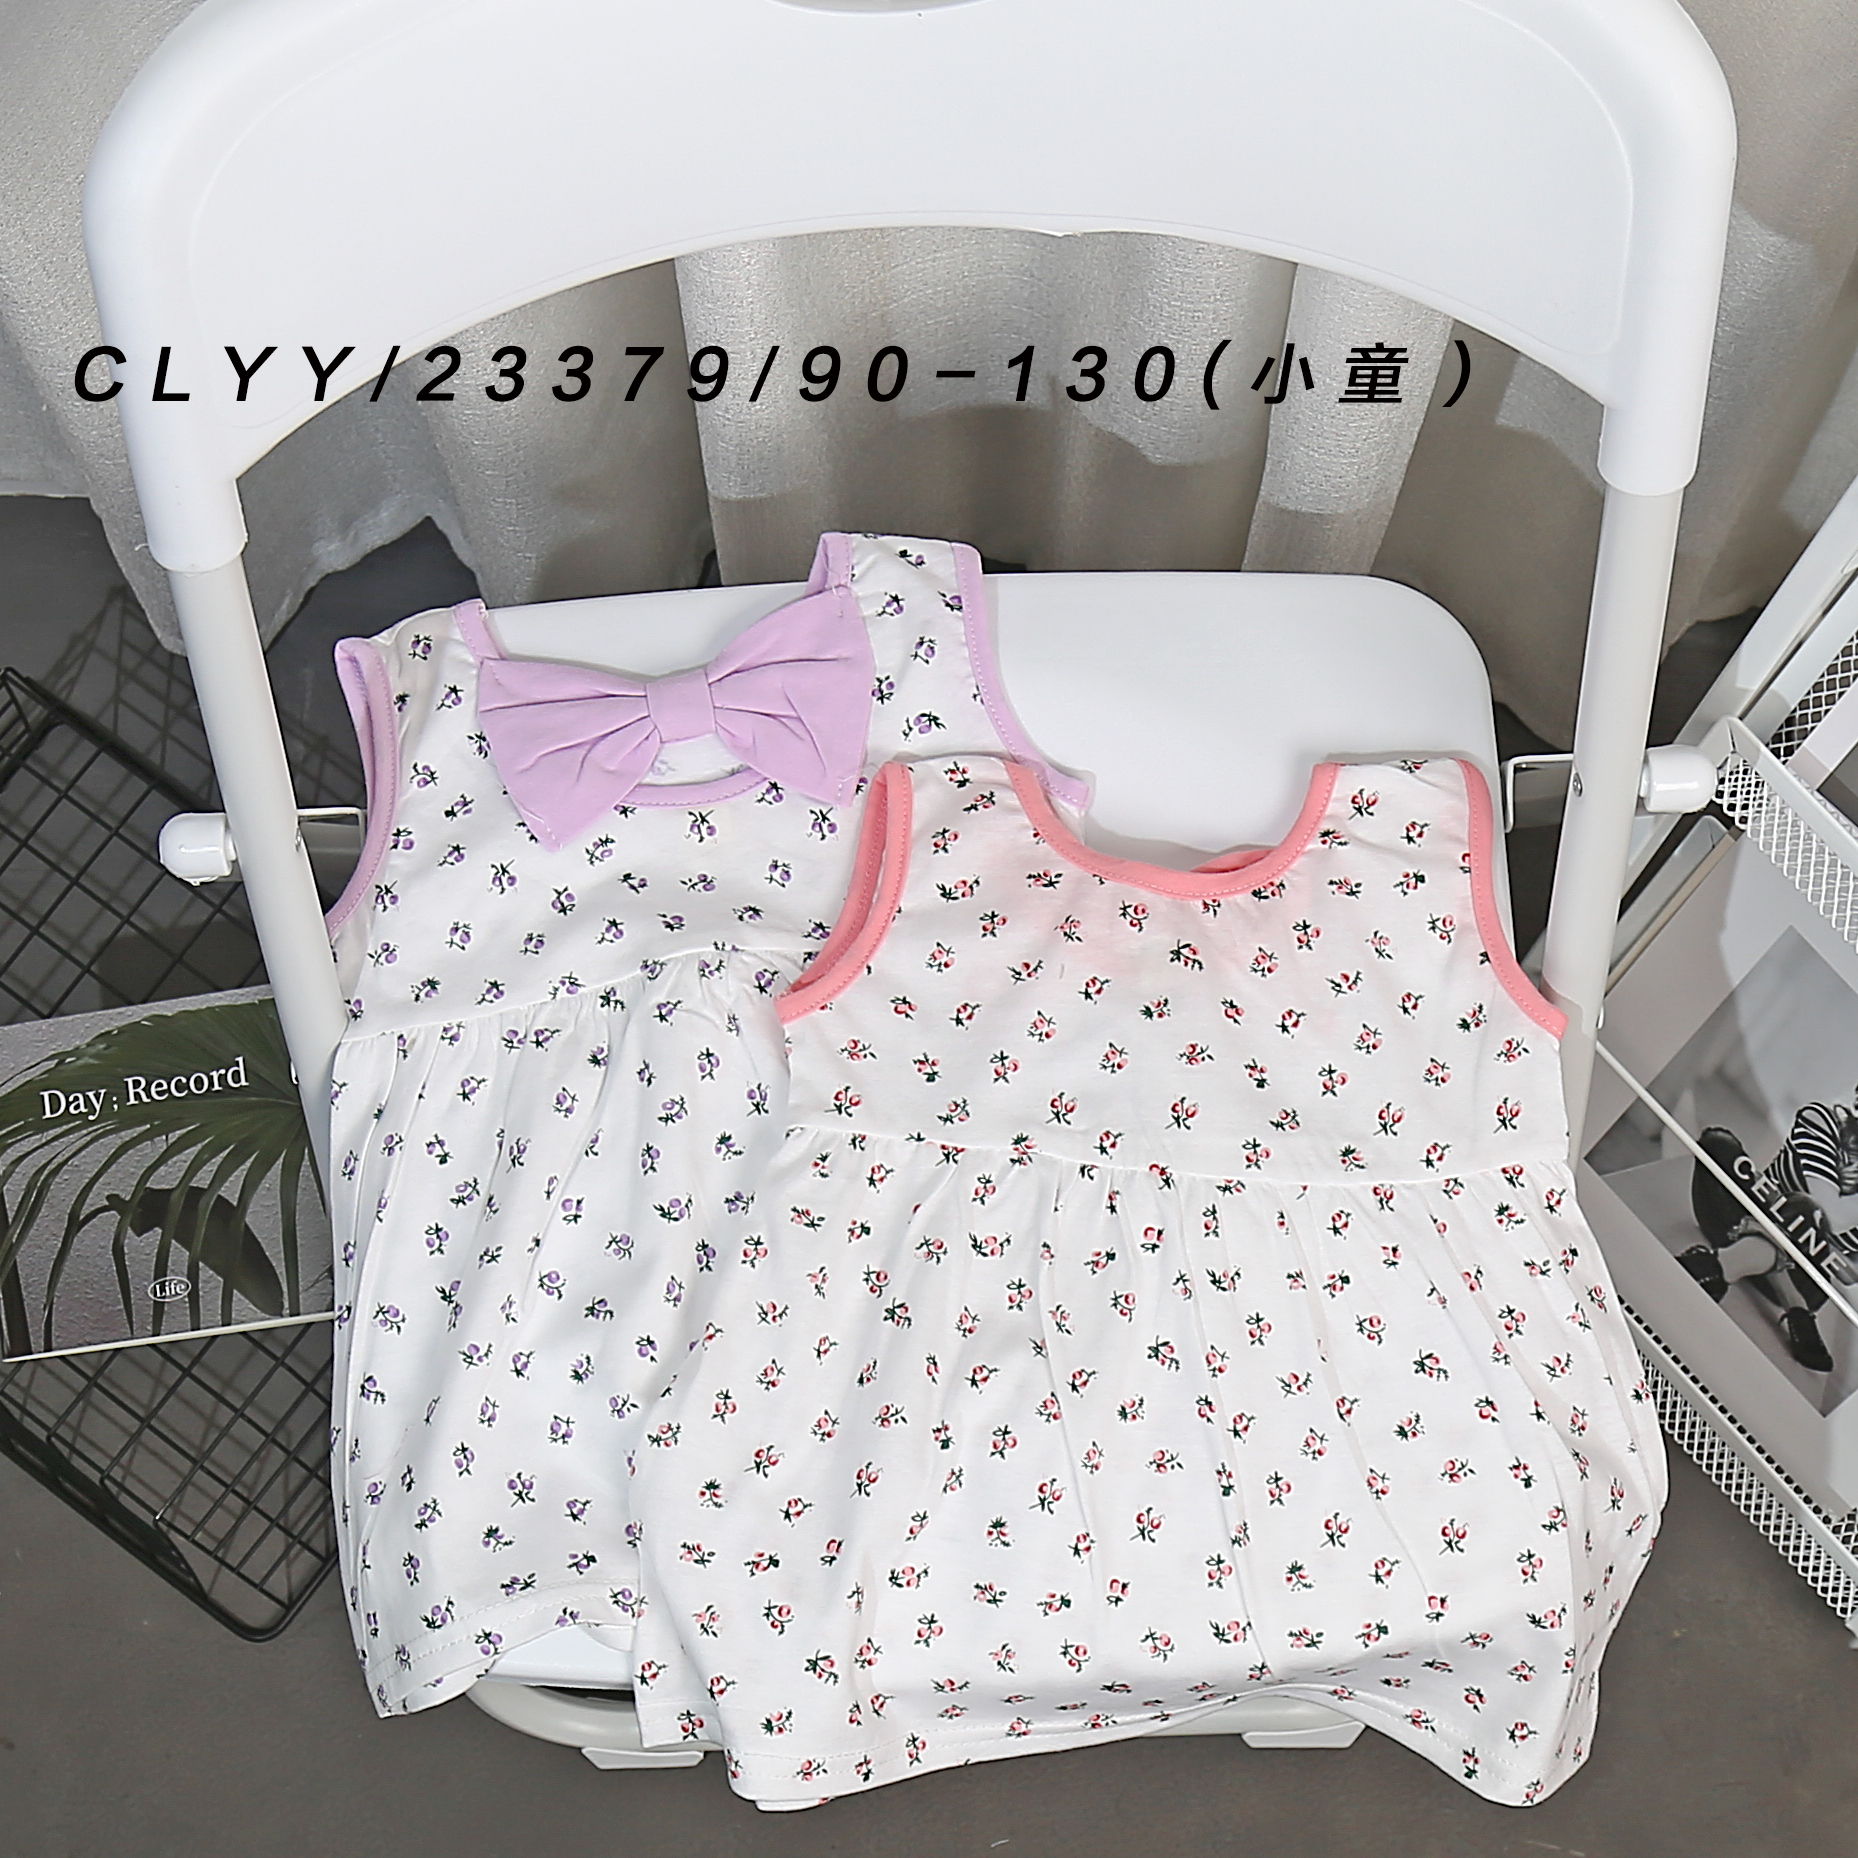 simple cotton baby kids clothes sleeveless T-shirts girls clothing wholesale cheap price